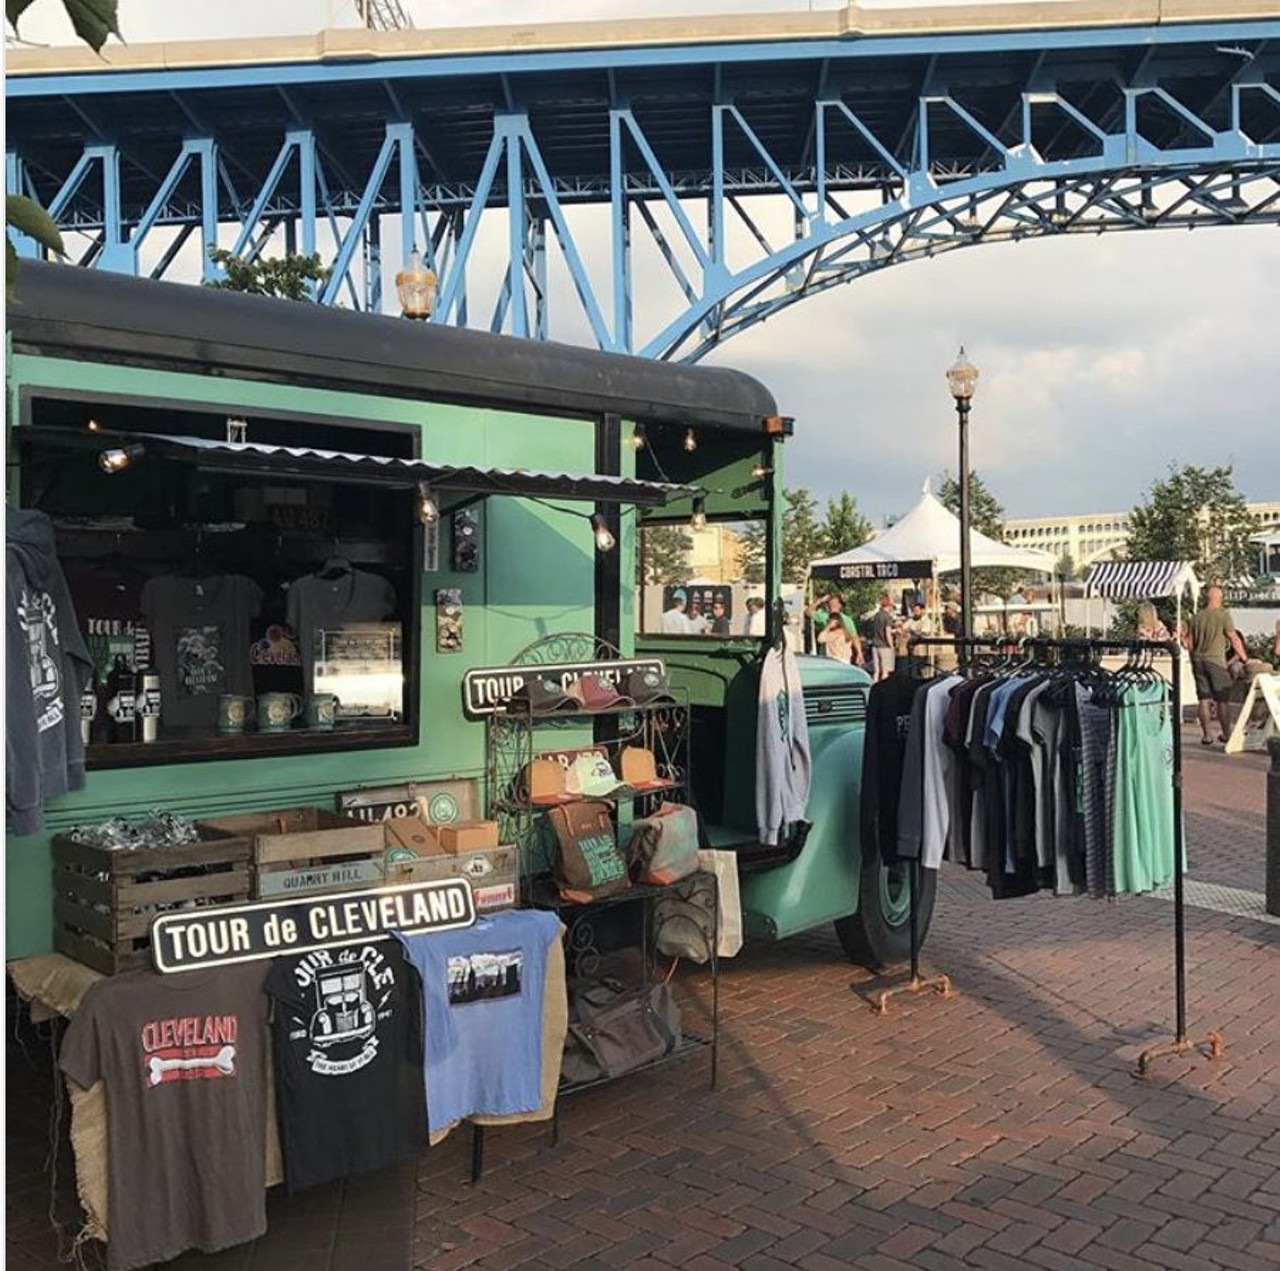  Tour de Cleveland
Tour de Cleveland sells their CLE-themed merchandise out of their unmissable blue-green vintage truck. Follow them on Instagram to find out where they&#146;re headed next.
Photo via  tourdecle/Instagram